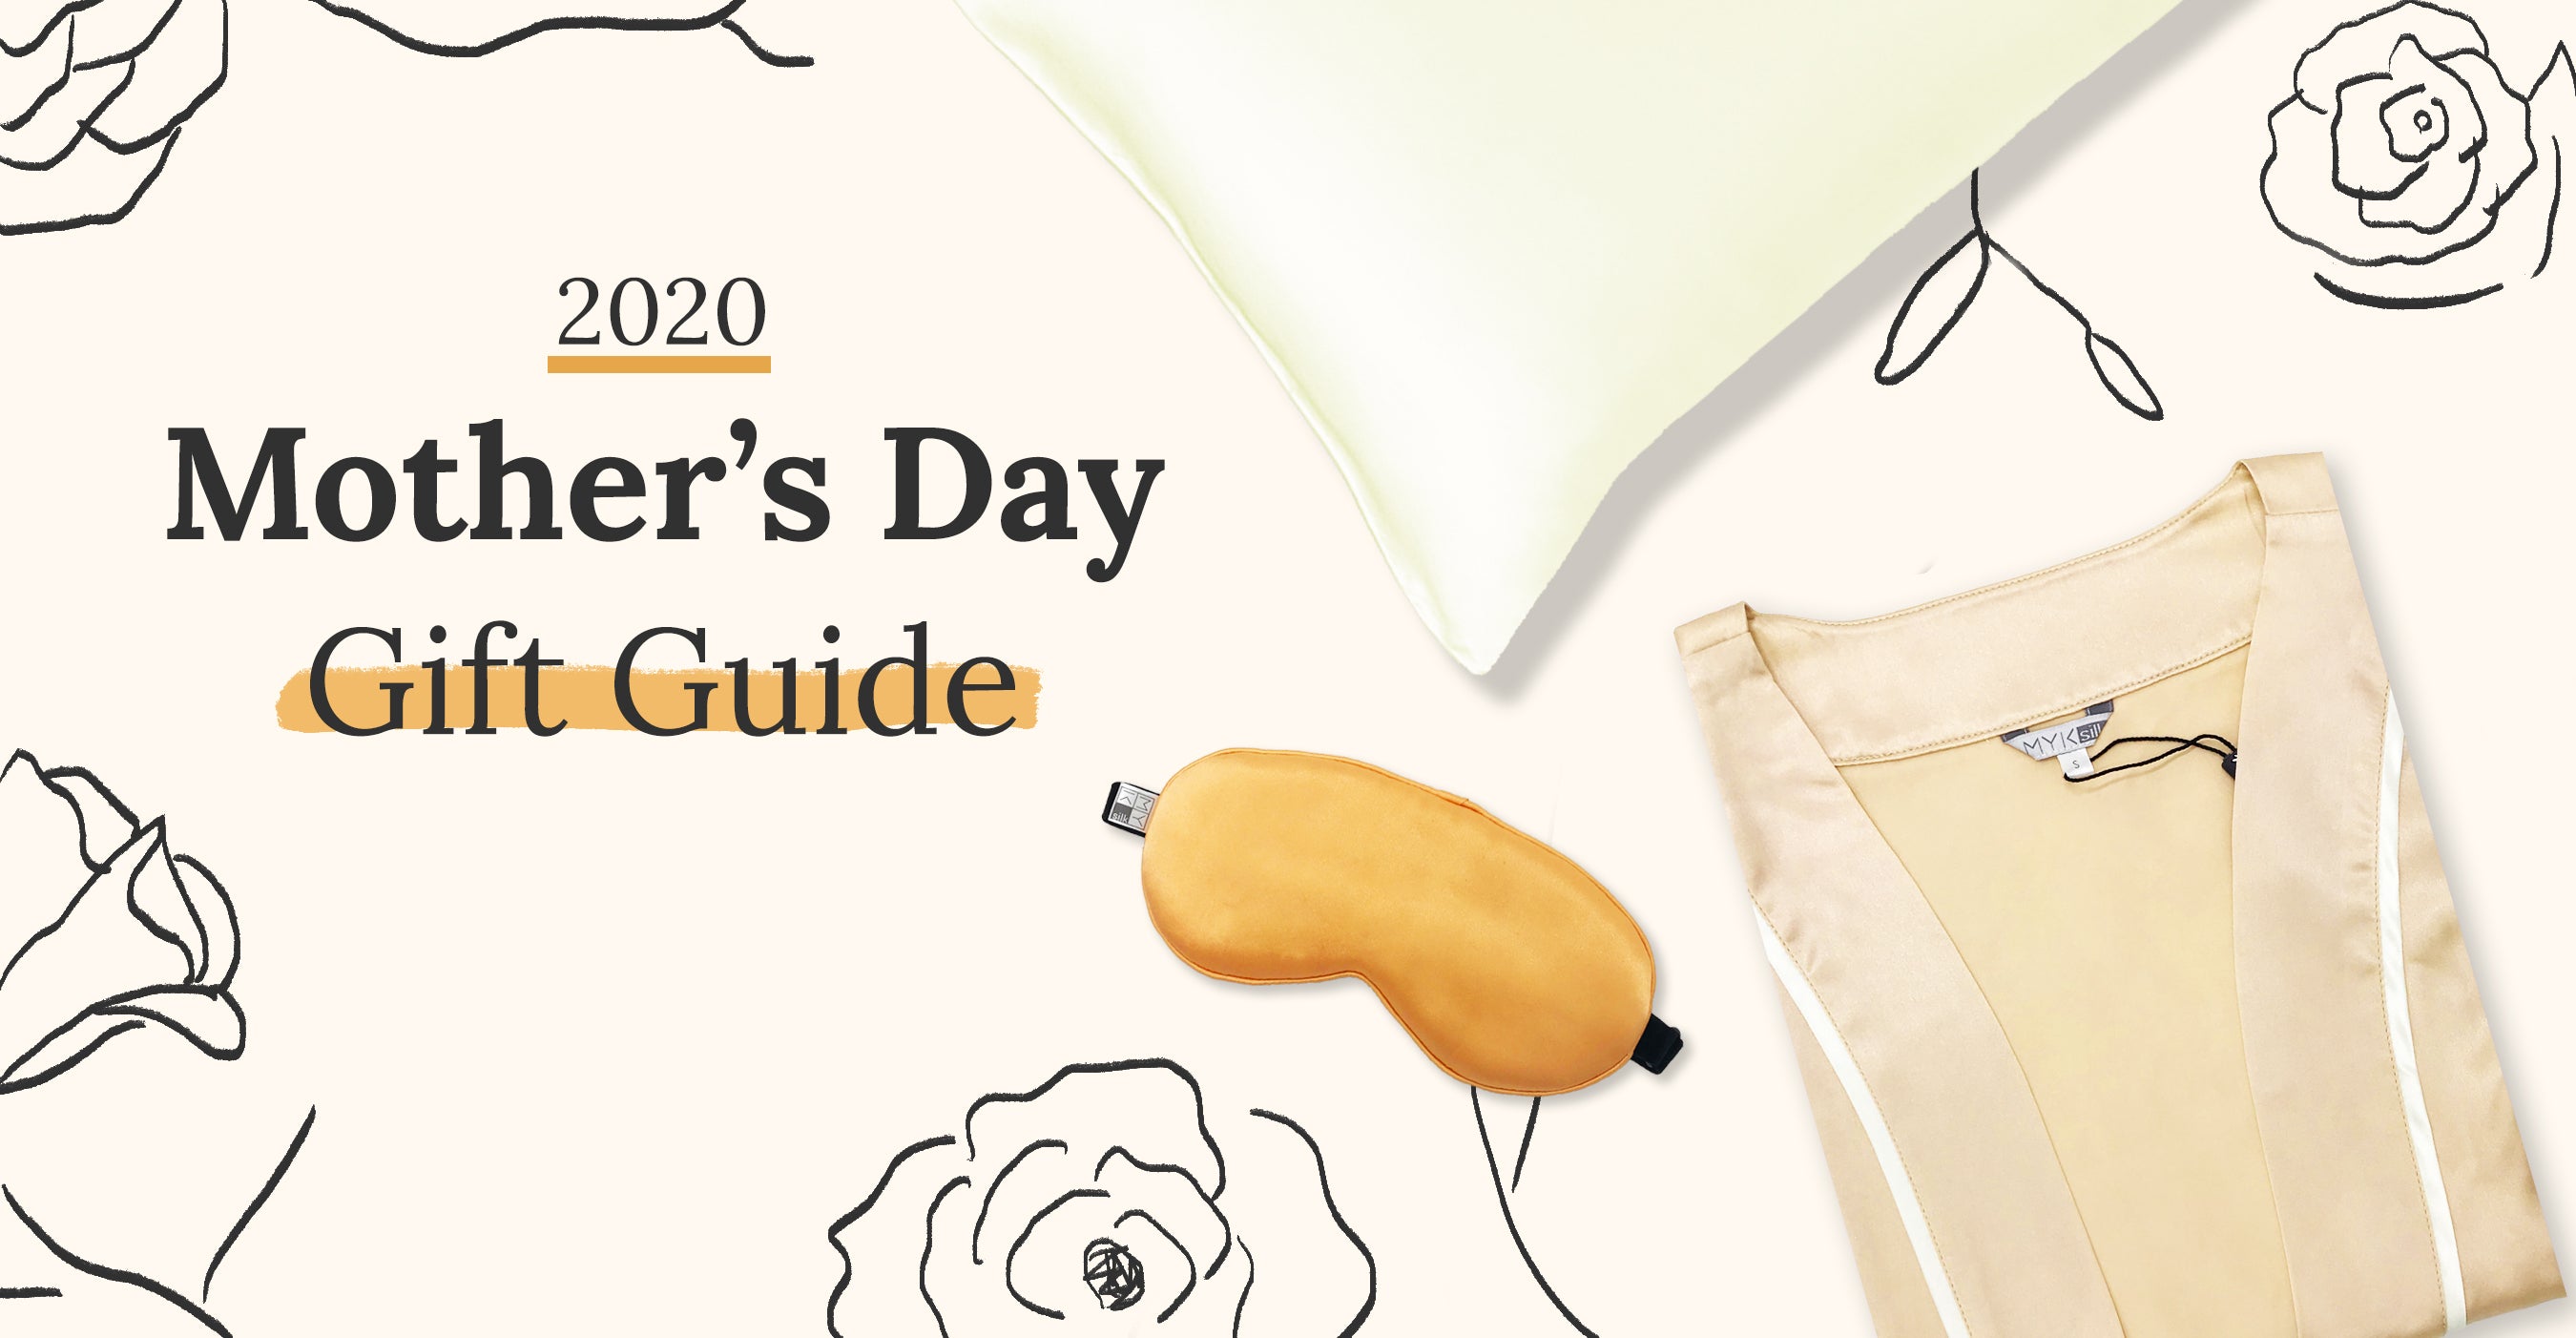 2020 Mother’s Day Gift Guide